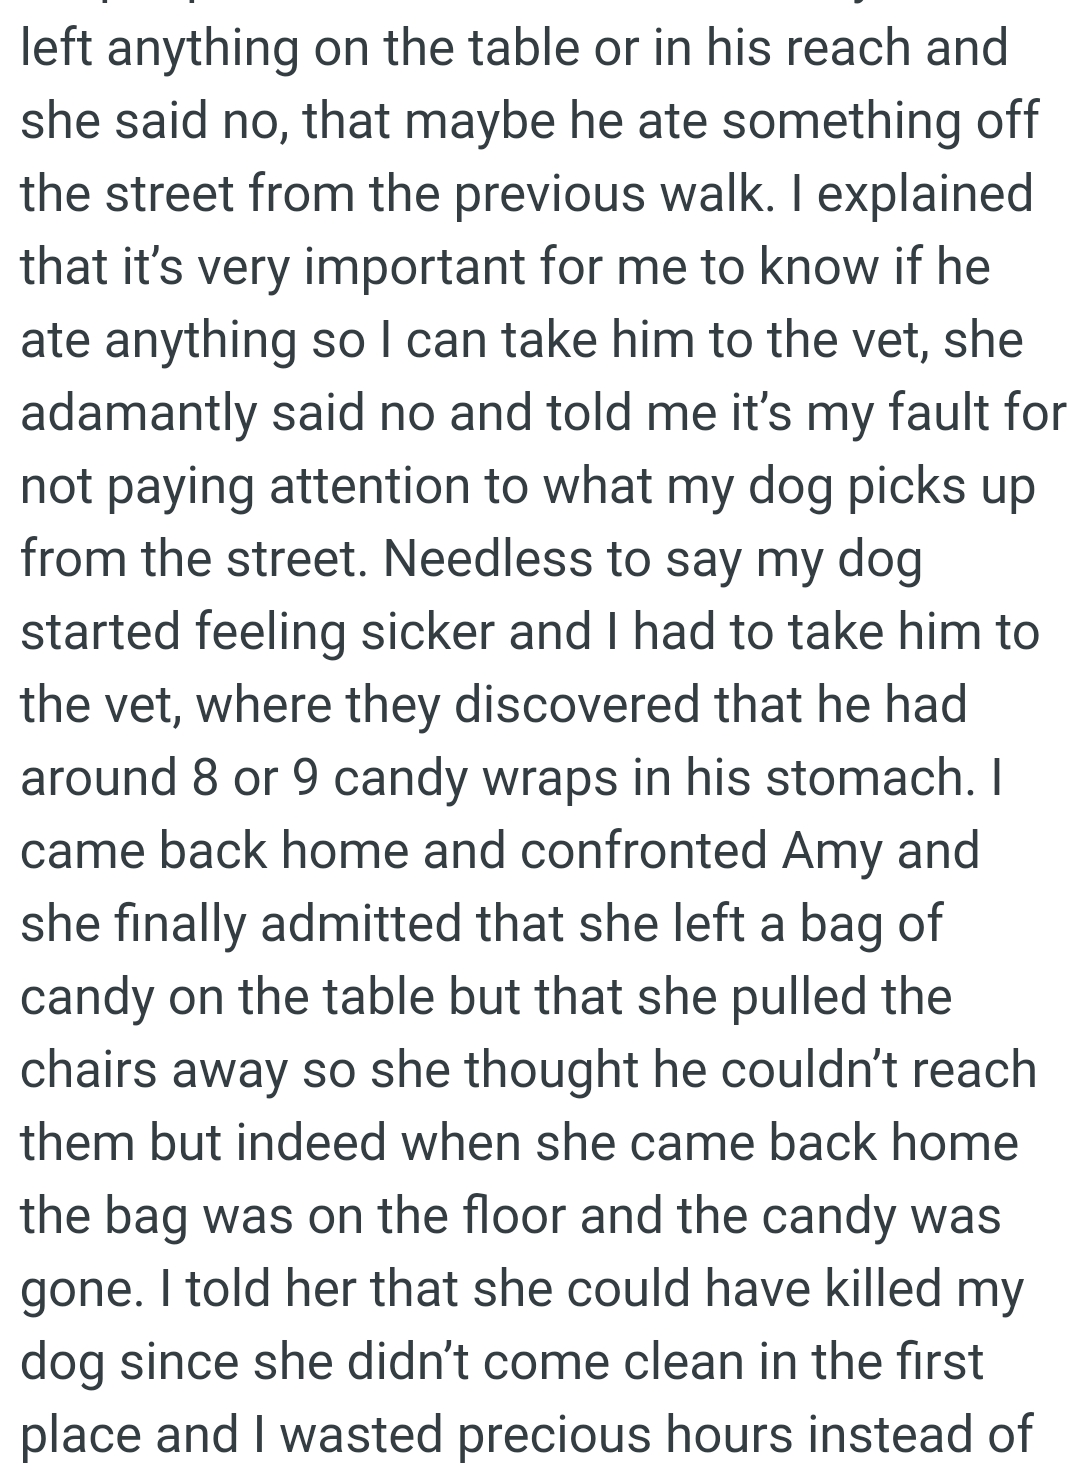 The OP explained that it’s very important for her to know if the dog ate anything